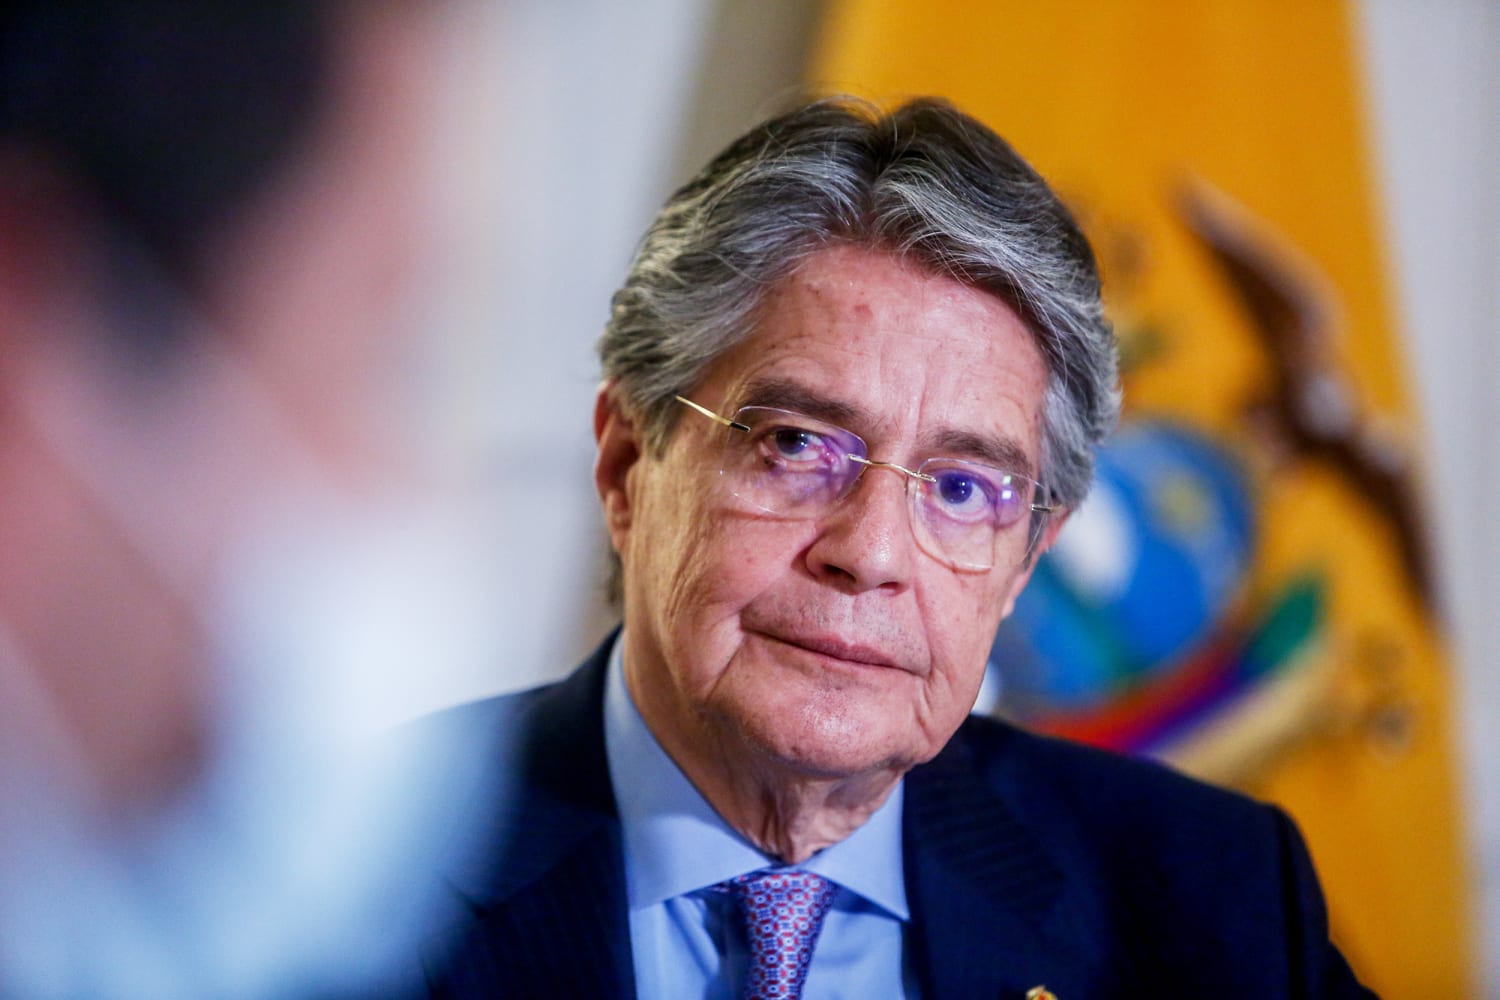 Why Ecuador President Guillermo Lasso's Downfall Is Hitting Bonds -  Bloomberg